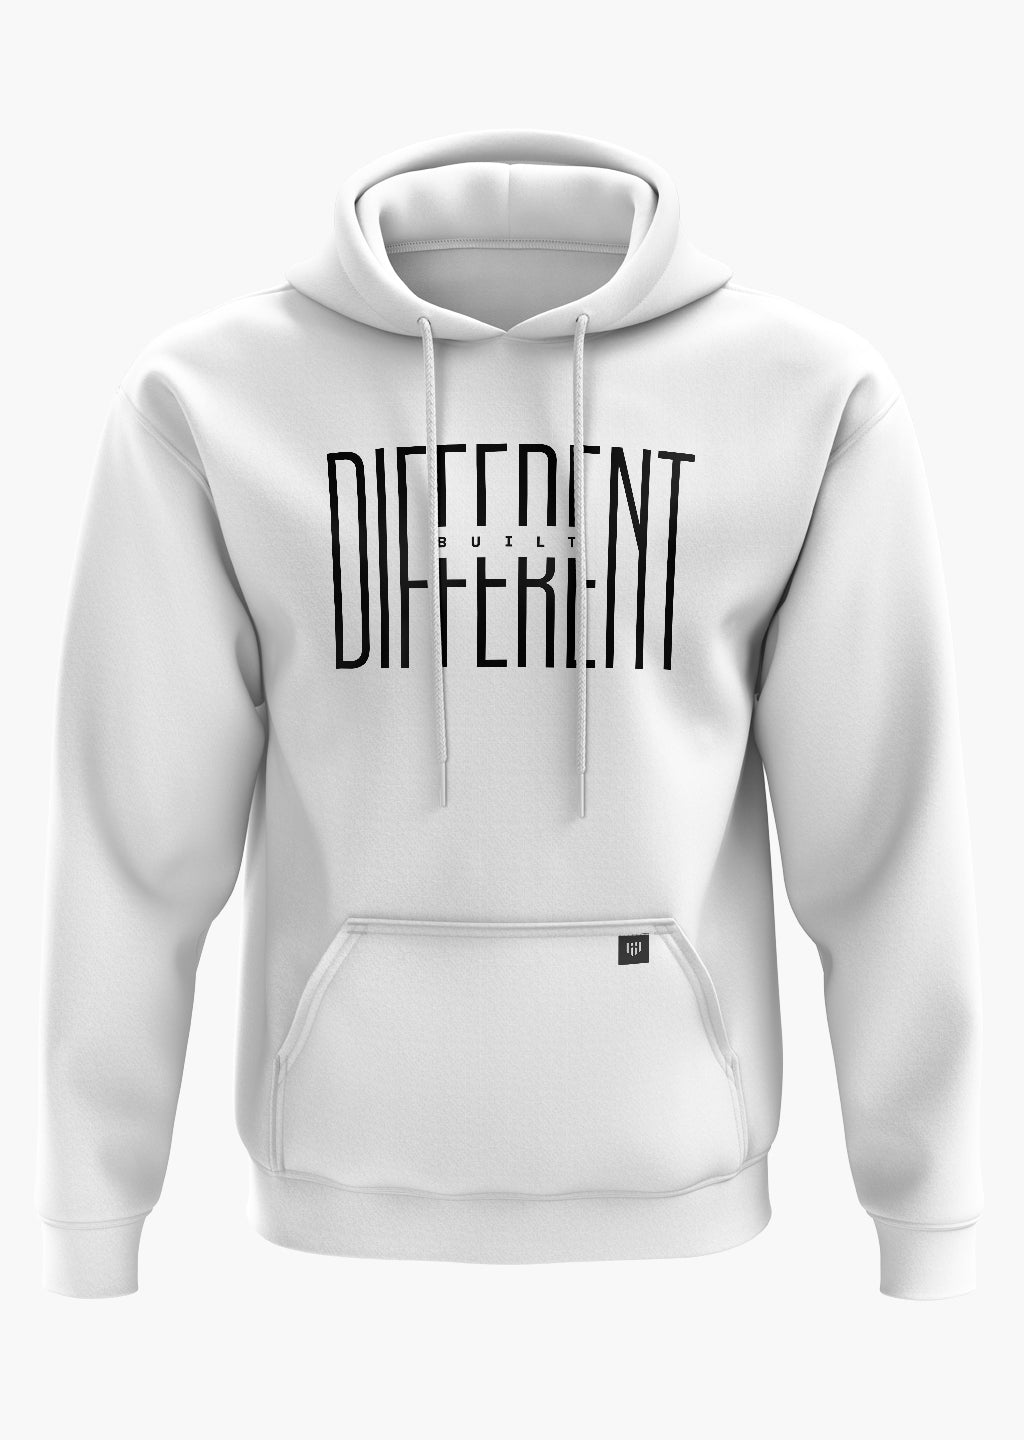 Built Different HOODIE